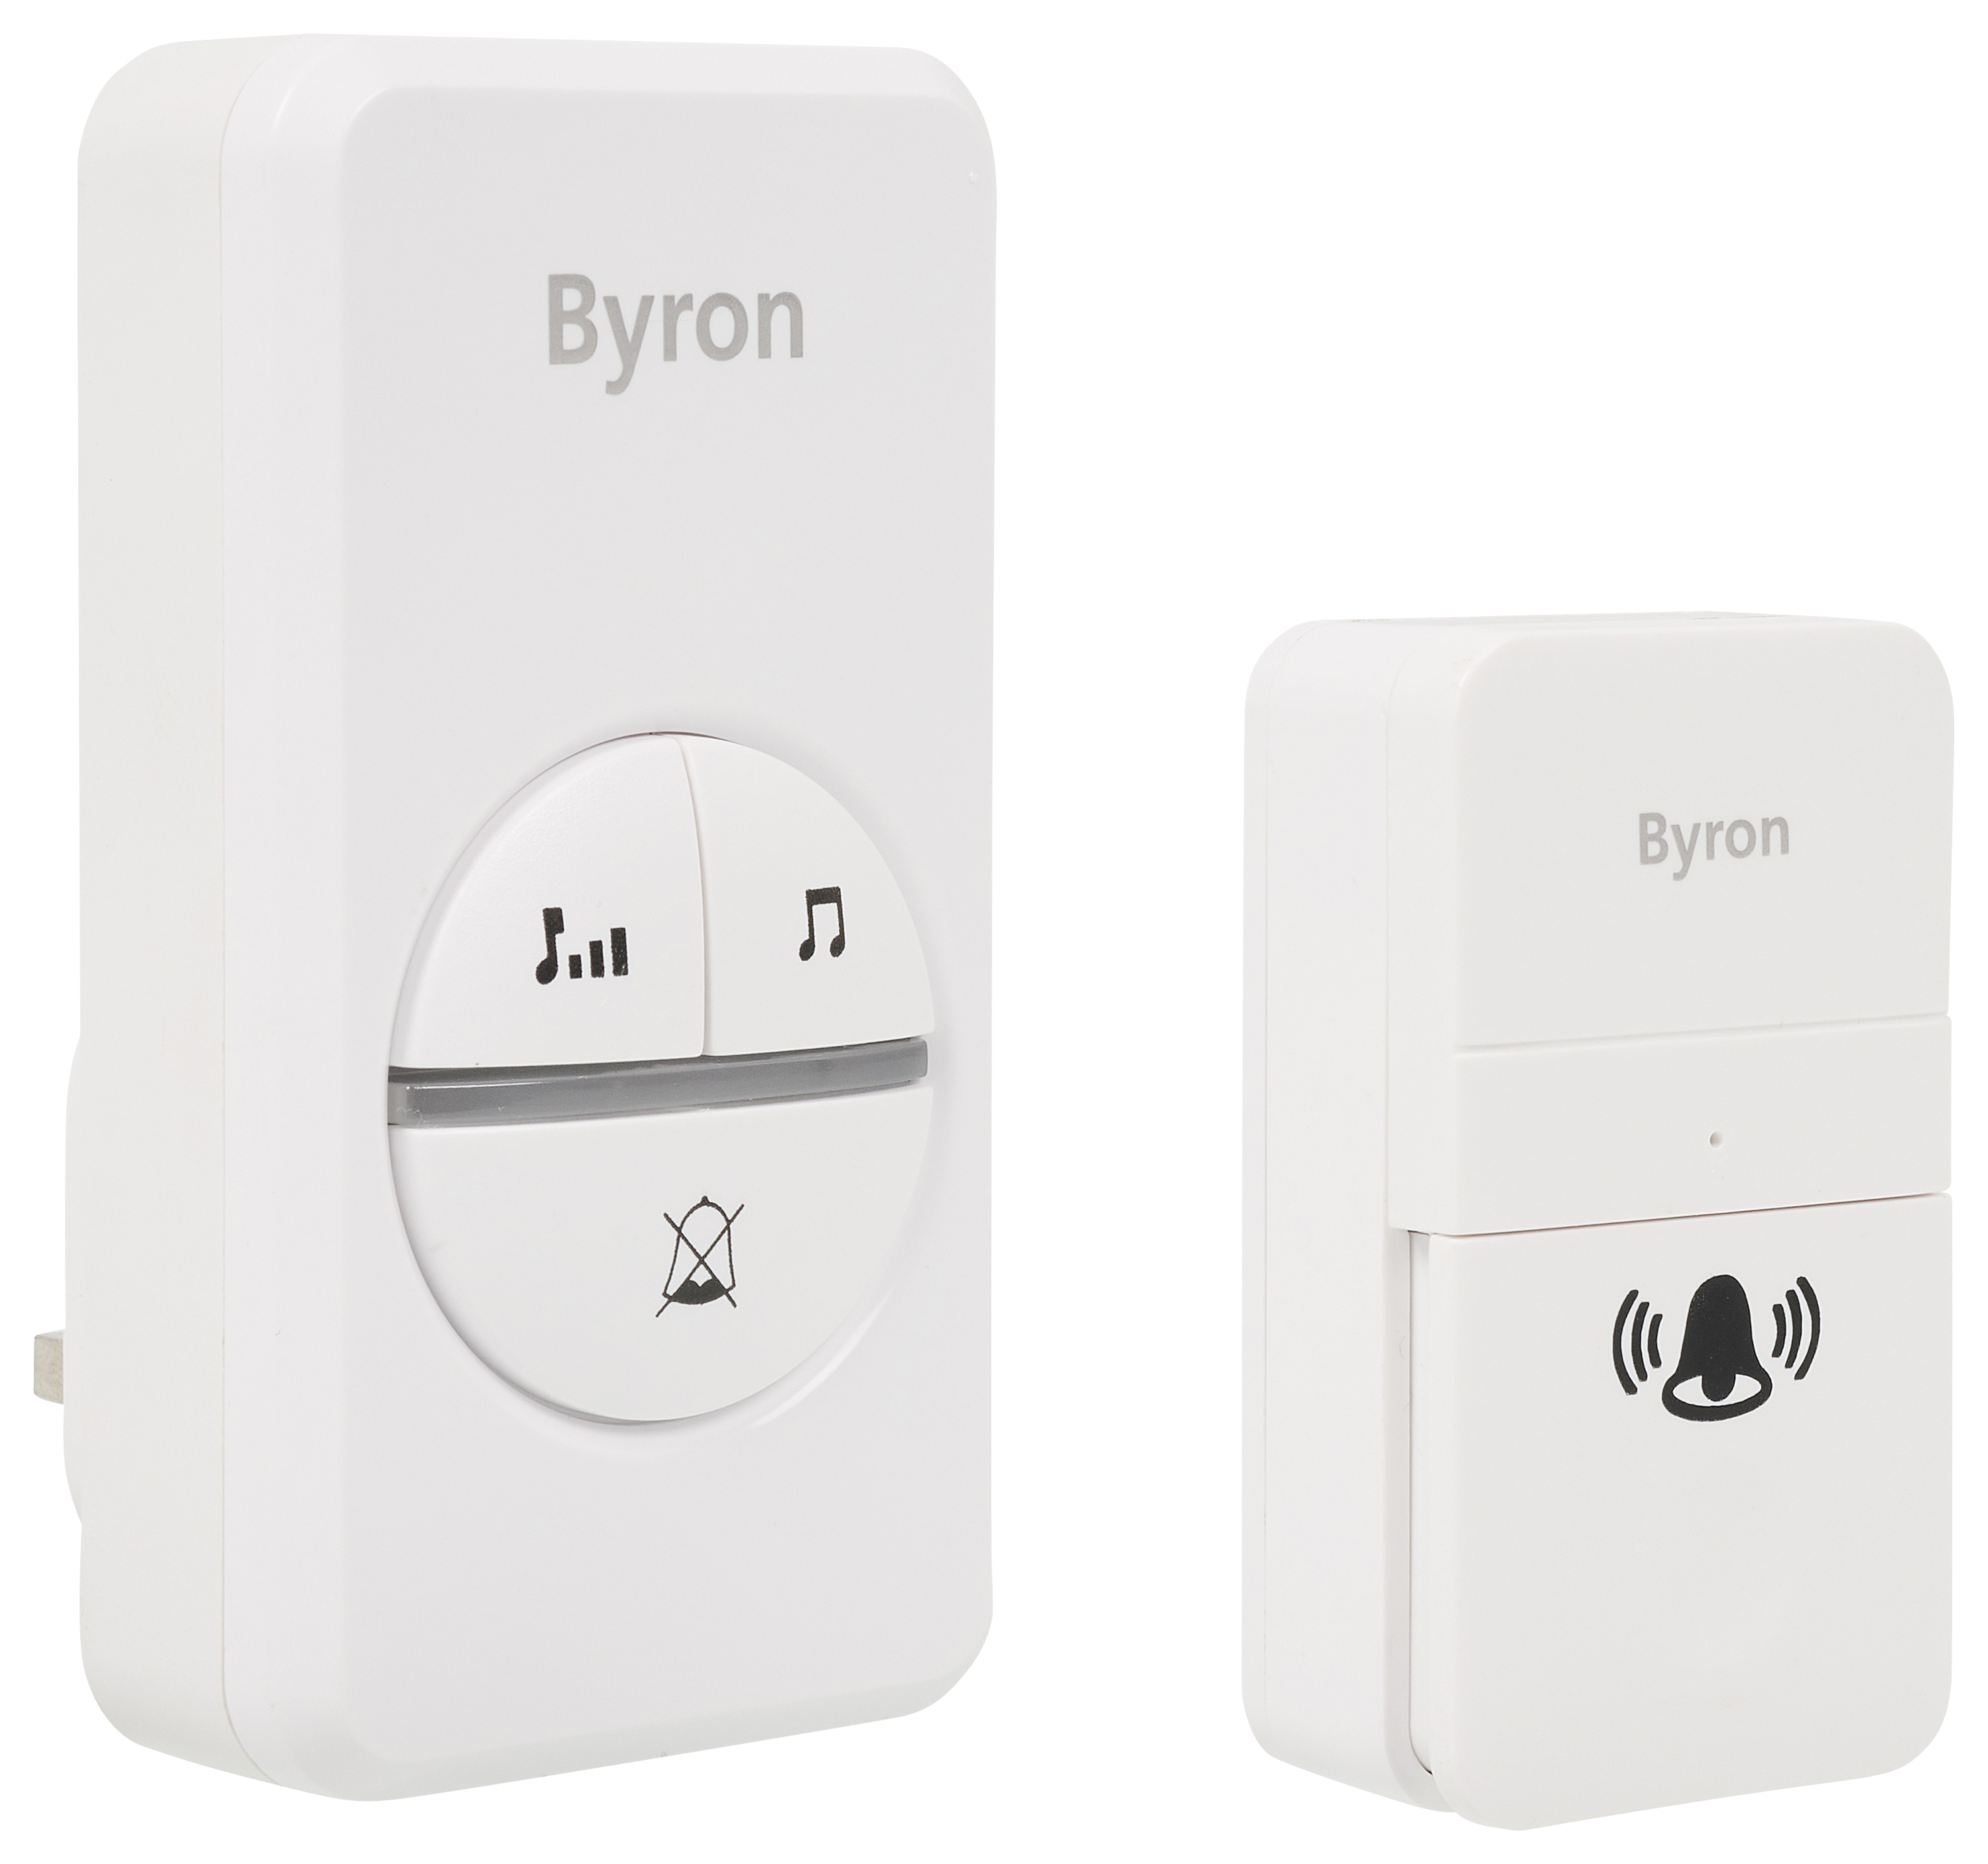 Byron Kinetic Doorbell With Chime - White